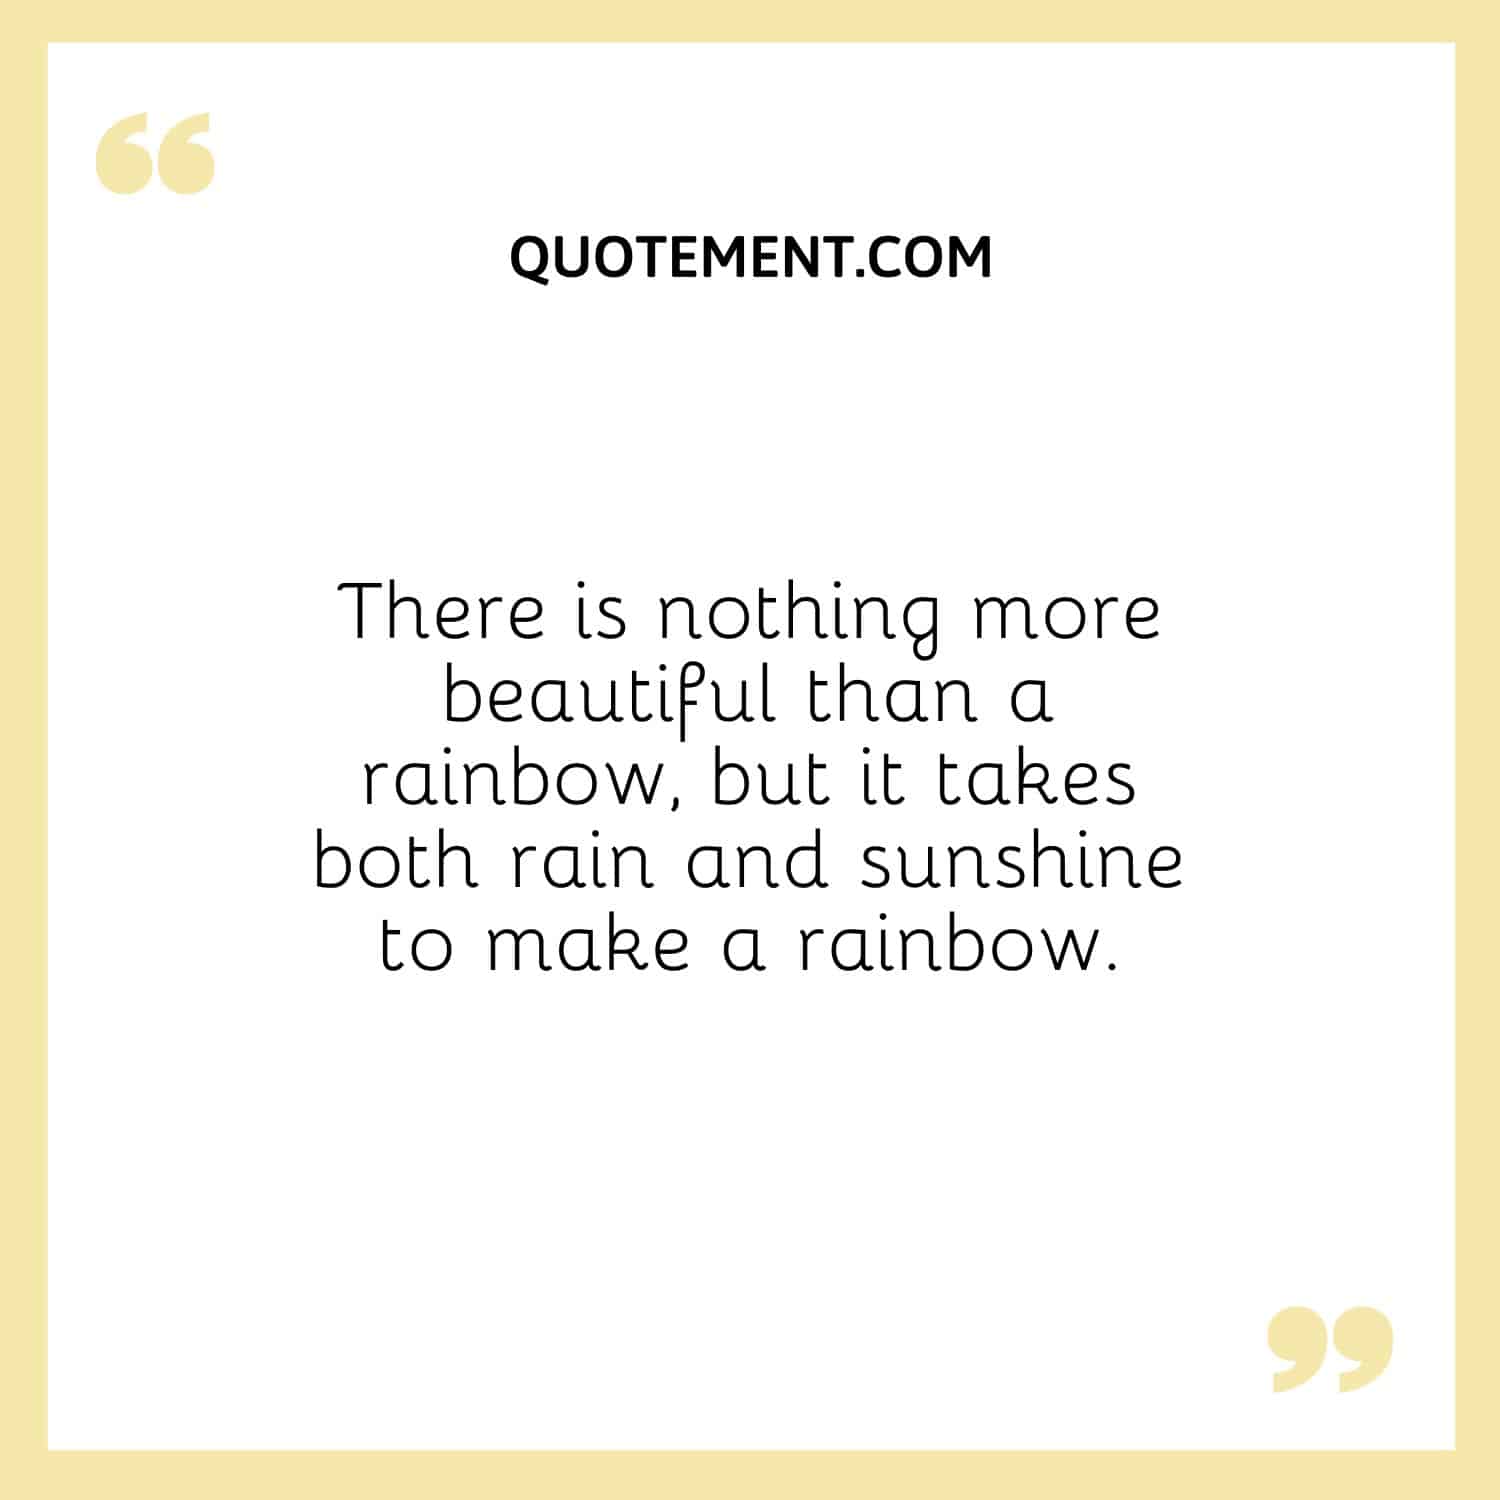 There is nothing more beautiful than a rainbow, but it takes both rain and sunshine to make a rainbow.